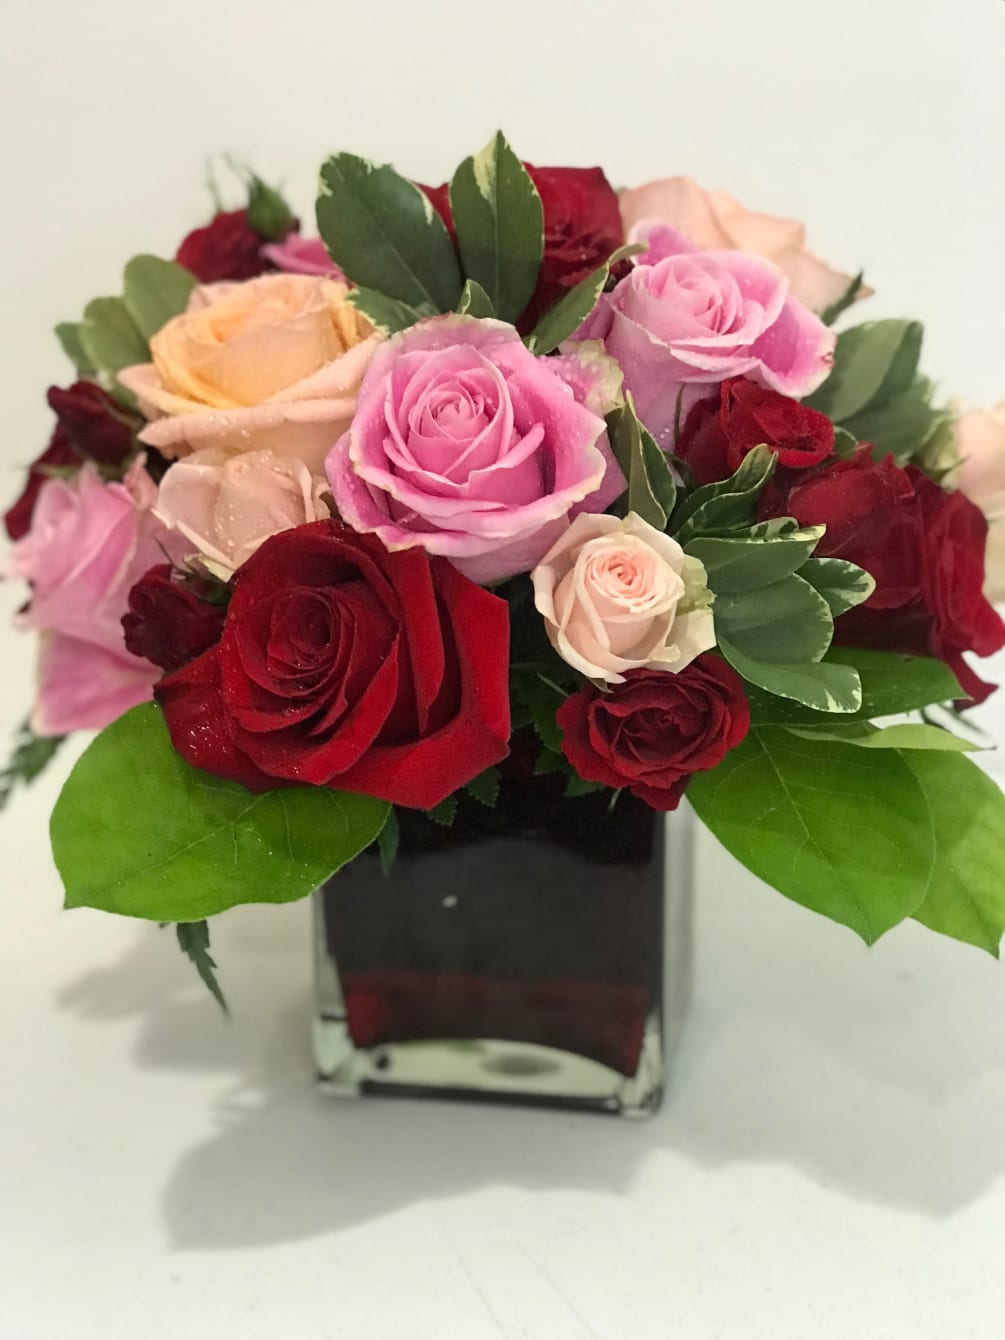 Surprise her with roses in four gorgeous shades of love artistically arranged